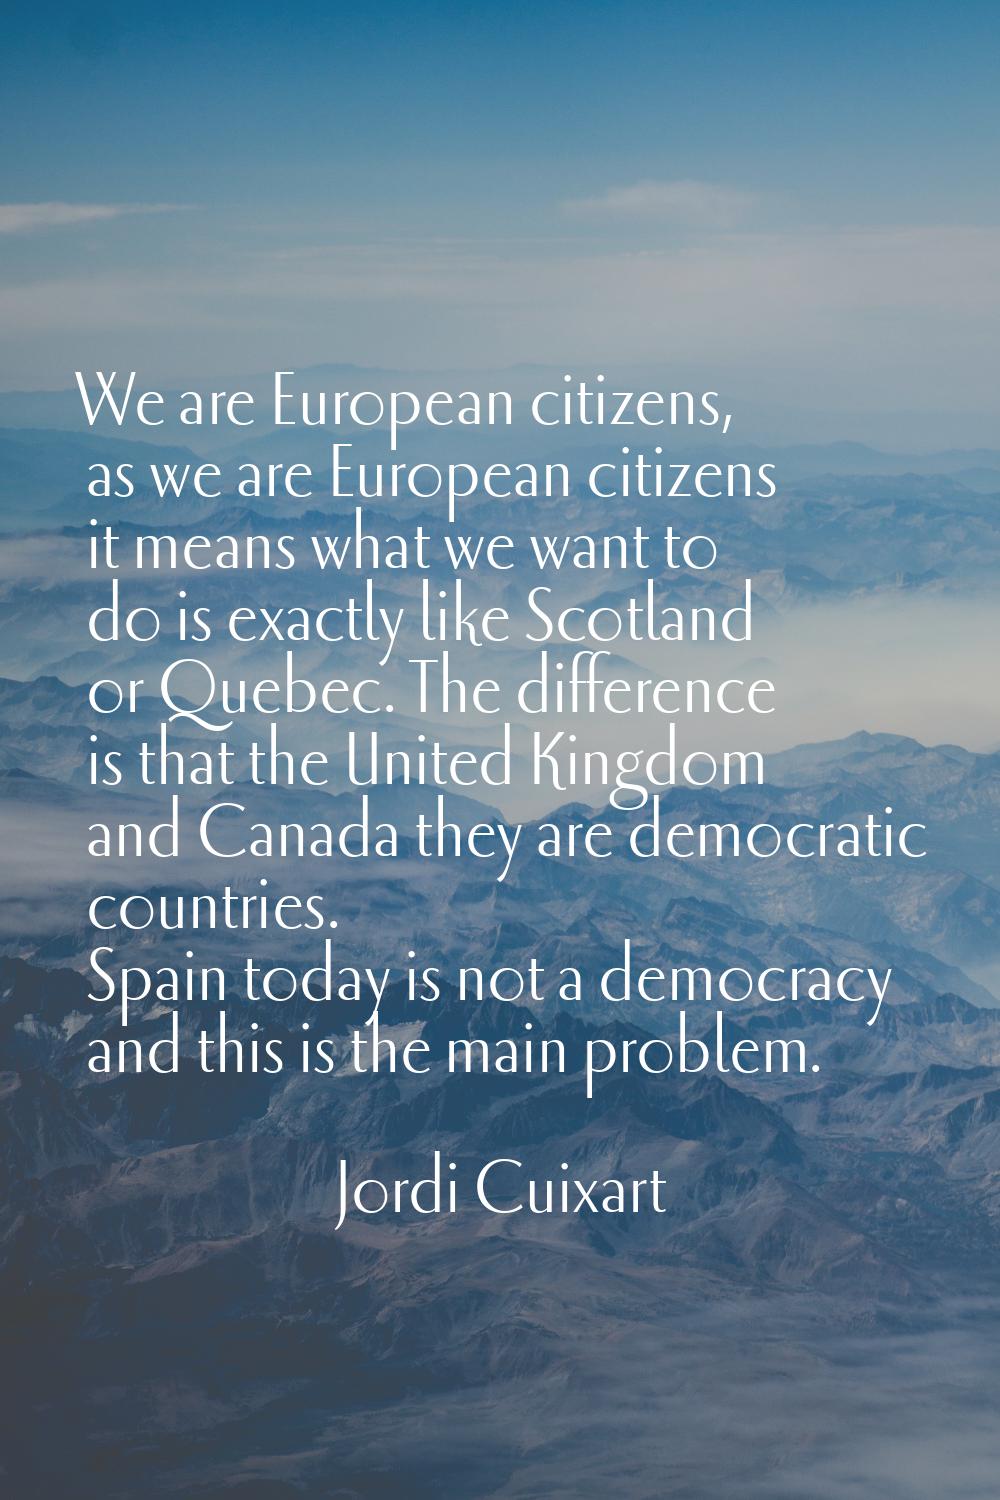 We are European citizens, as we are European citizens it means what we want to do is exactly like S